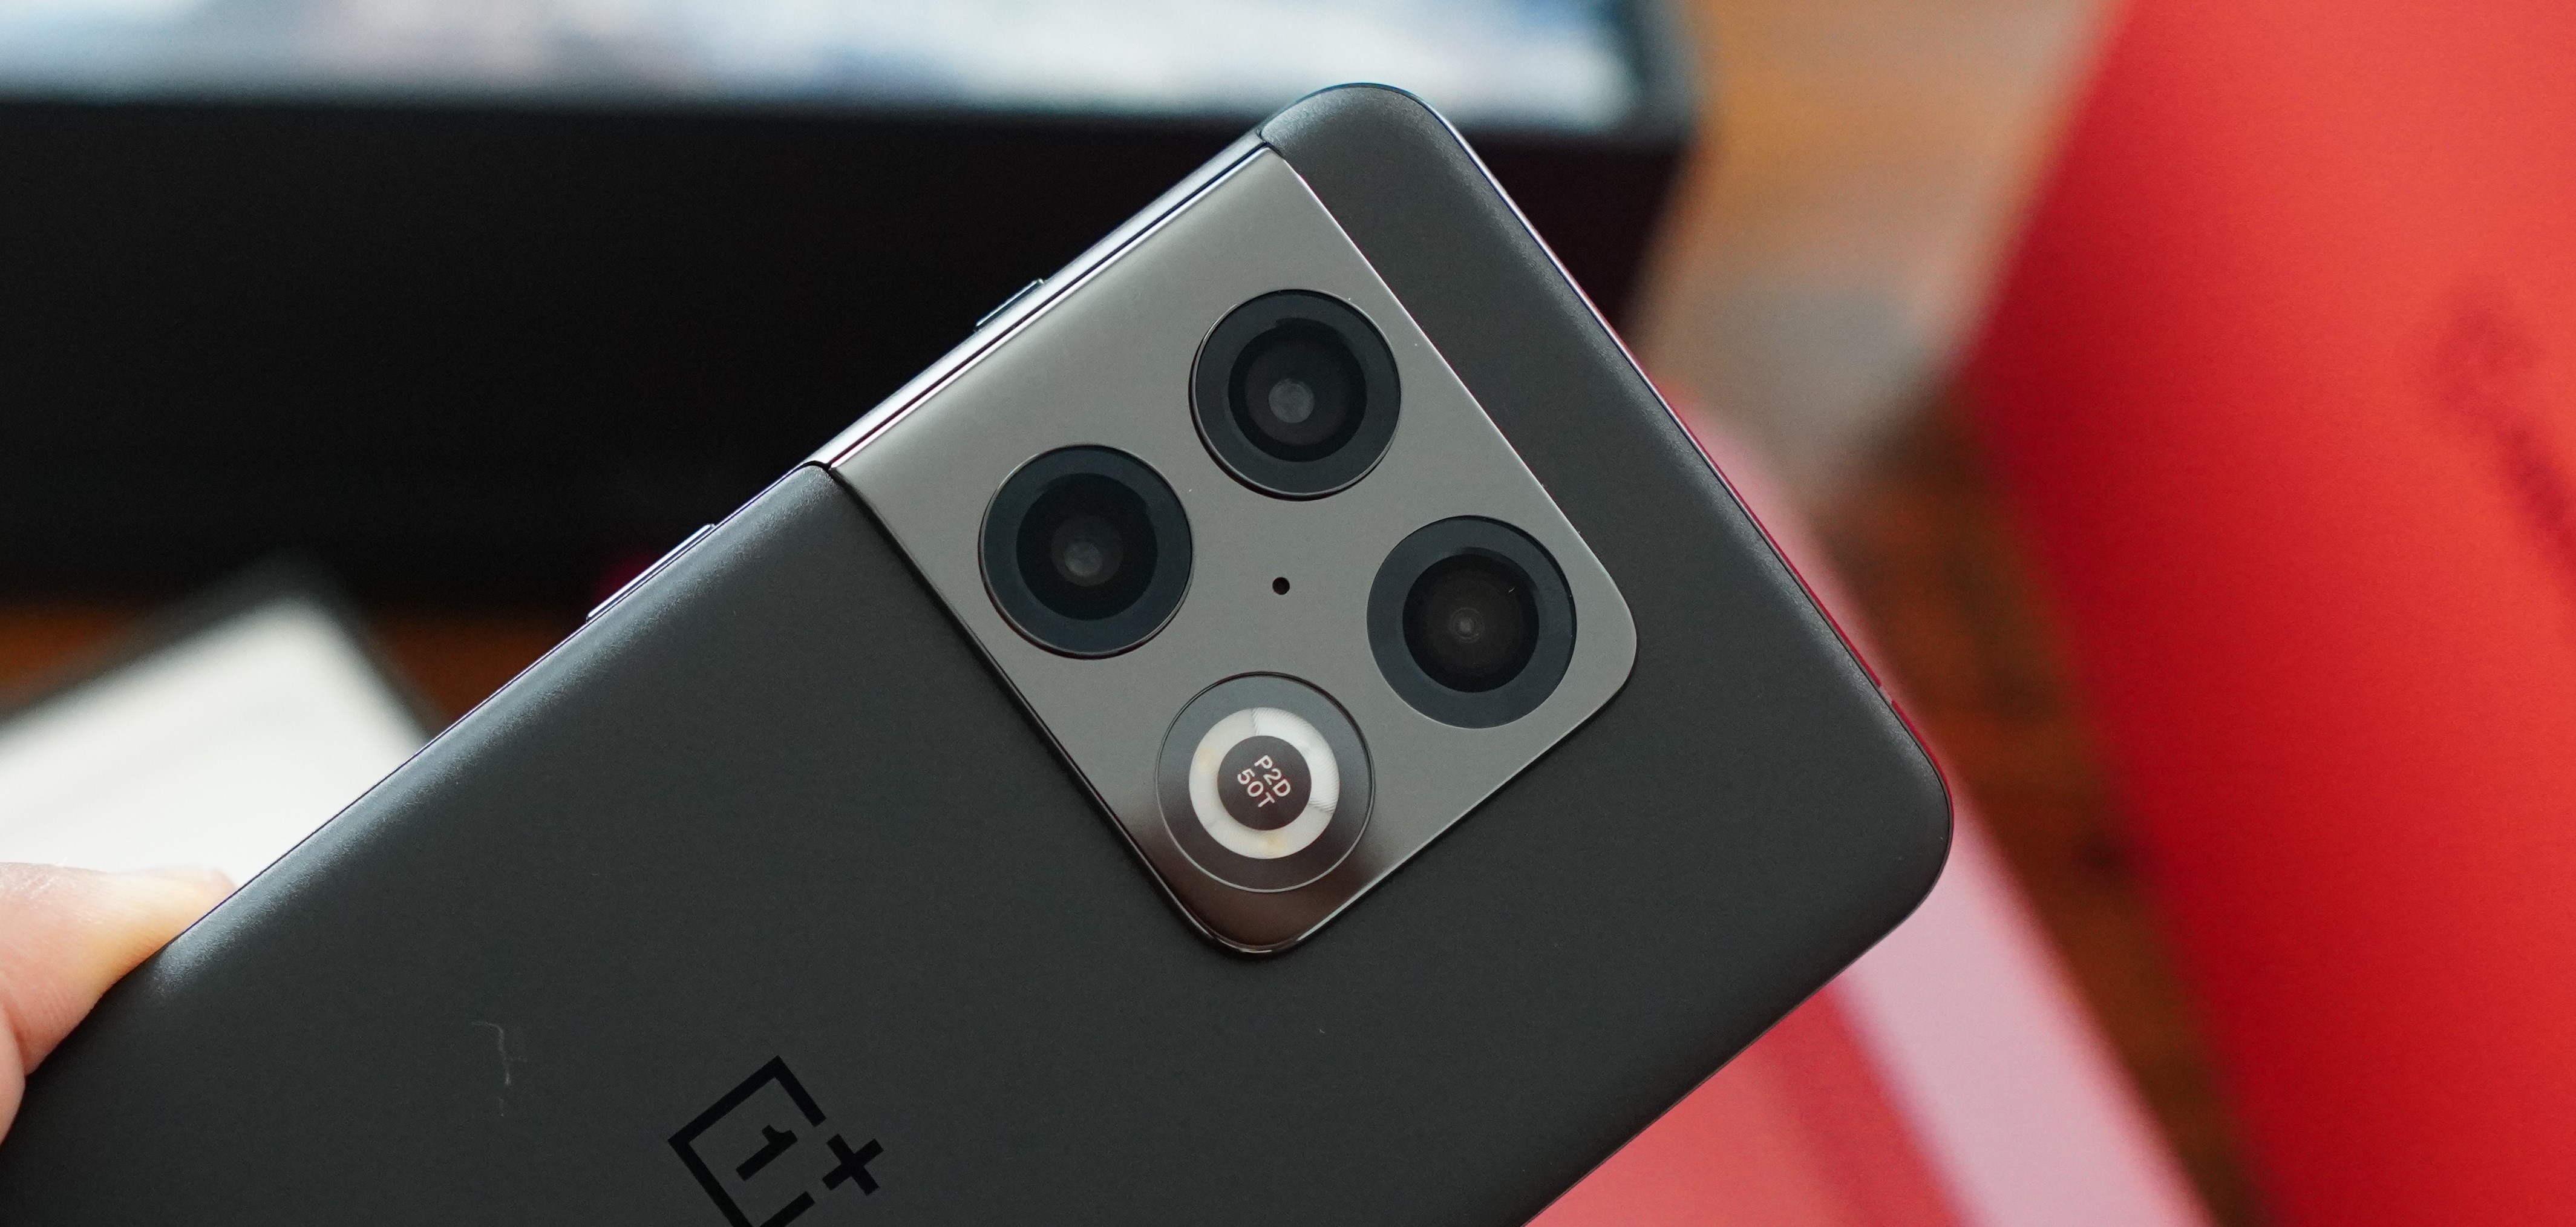 OnePlus 10 Pro 5G long-term review: The best gaming smartphone?